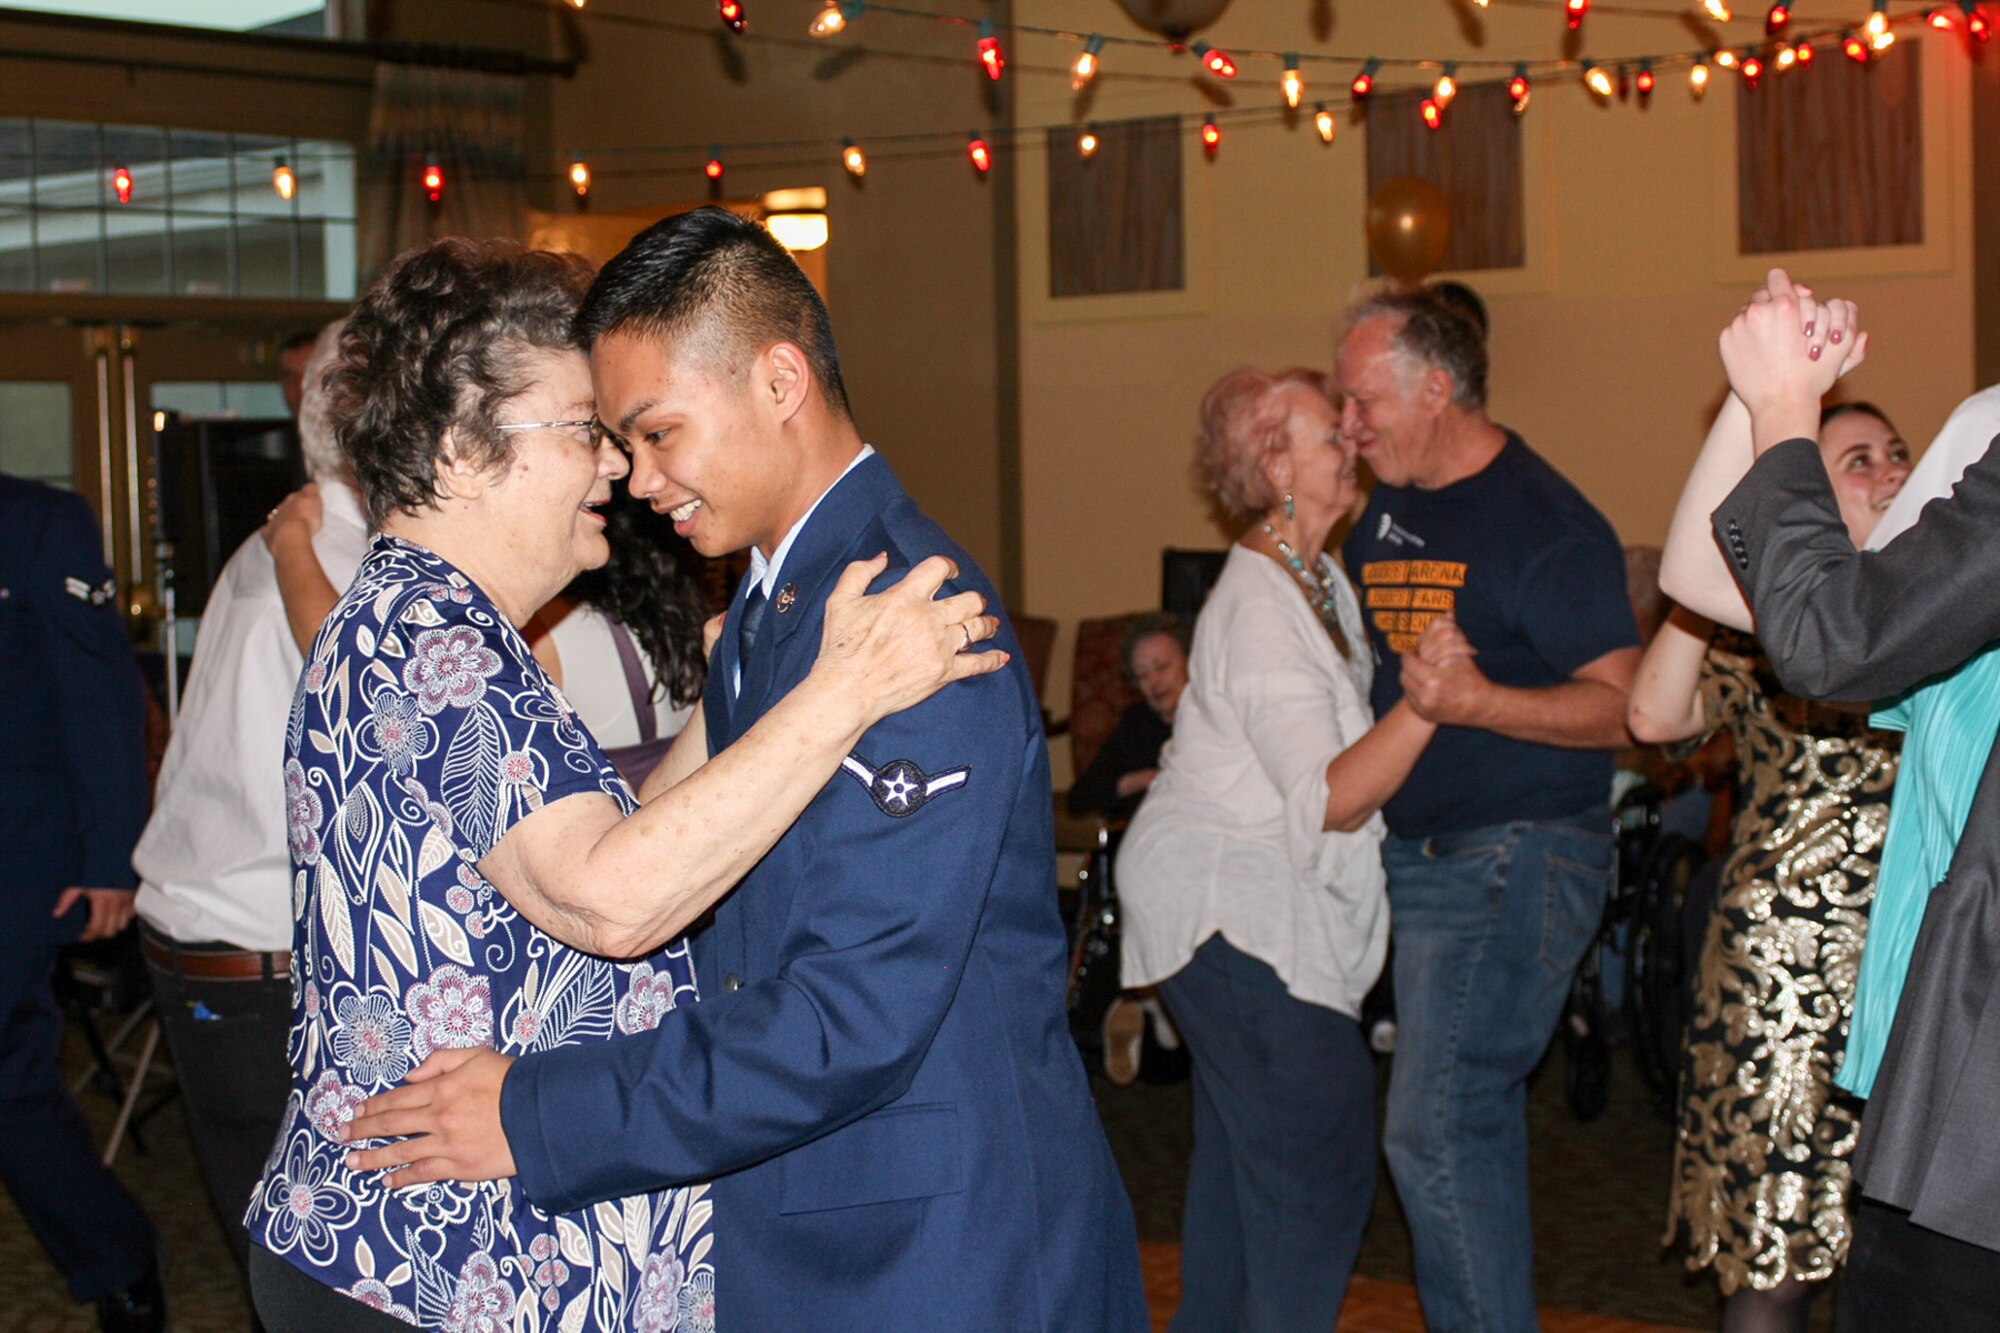 Airman Christian Gran, 75th Medical Group, dances with a resident of Chancellor Gardens Senior Living Center in Clearfield Feb. 13 at the annual Valentines Dance. More than 60 residents attended and mingled with Team Hill guests. Staff members noted that the Team Hill Airmen are "always the highlight of the event." (U.S. Air Force photo by Jen Eaton)